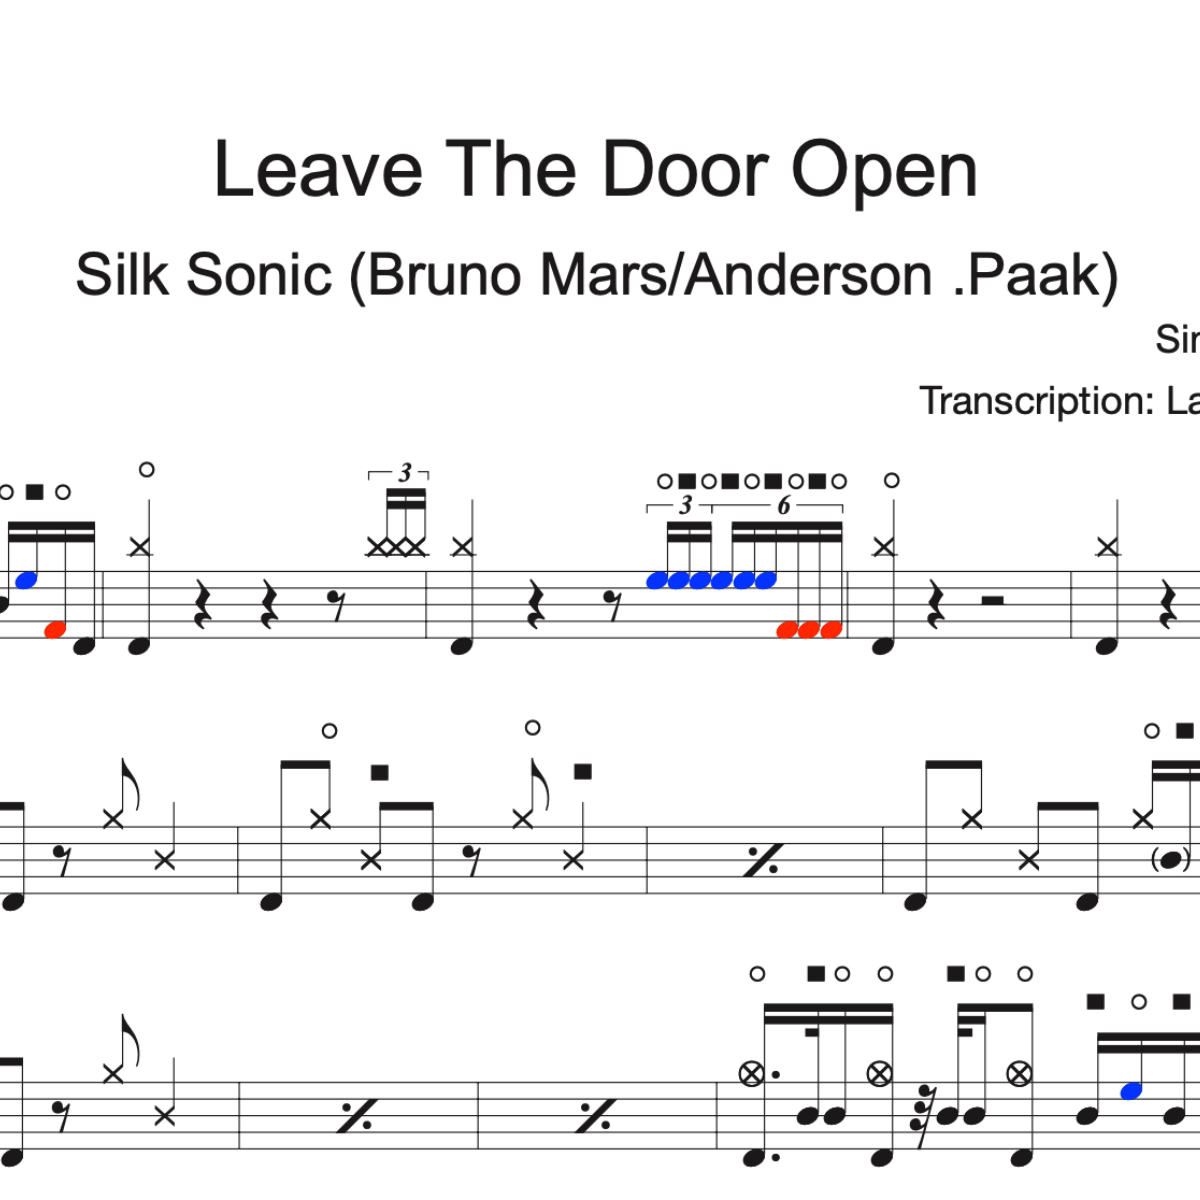 Cifra Club - Bruno Mars - Leave The Door Open (Feat. Anderson .Paak & Silk  Sonic) 1,5 Tom Abaixo, PDF, Number One Singles